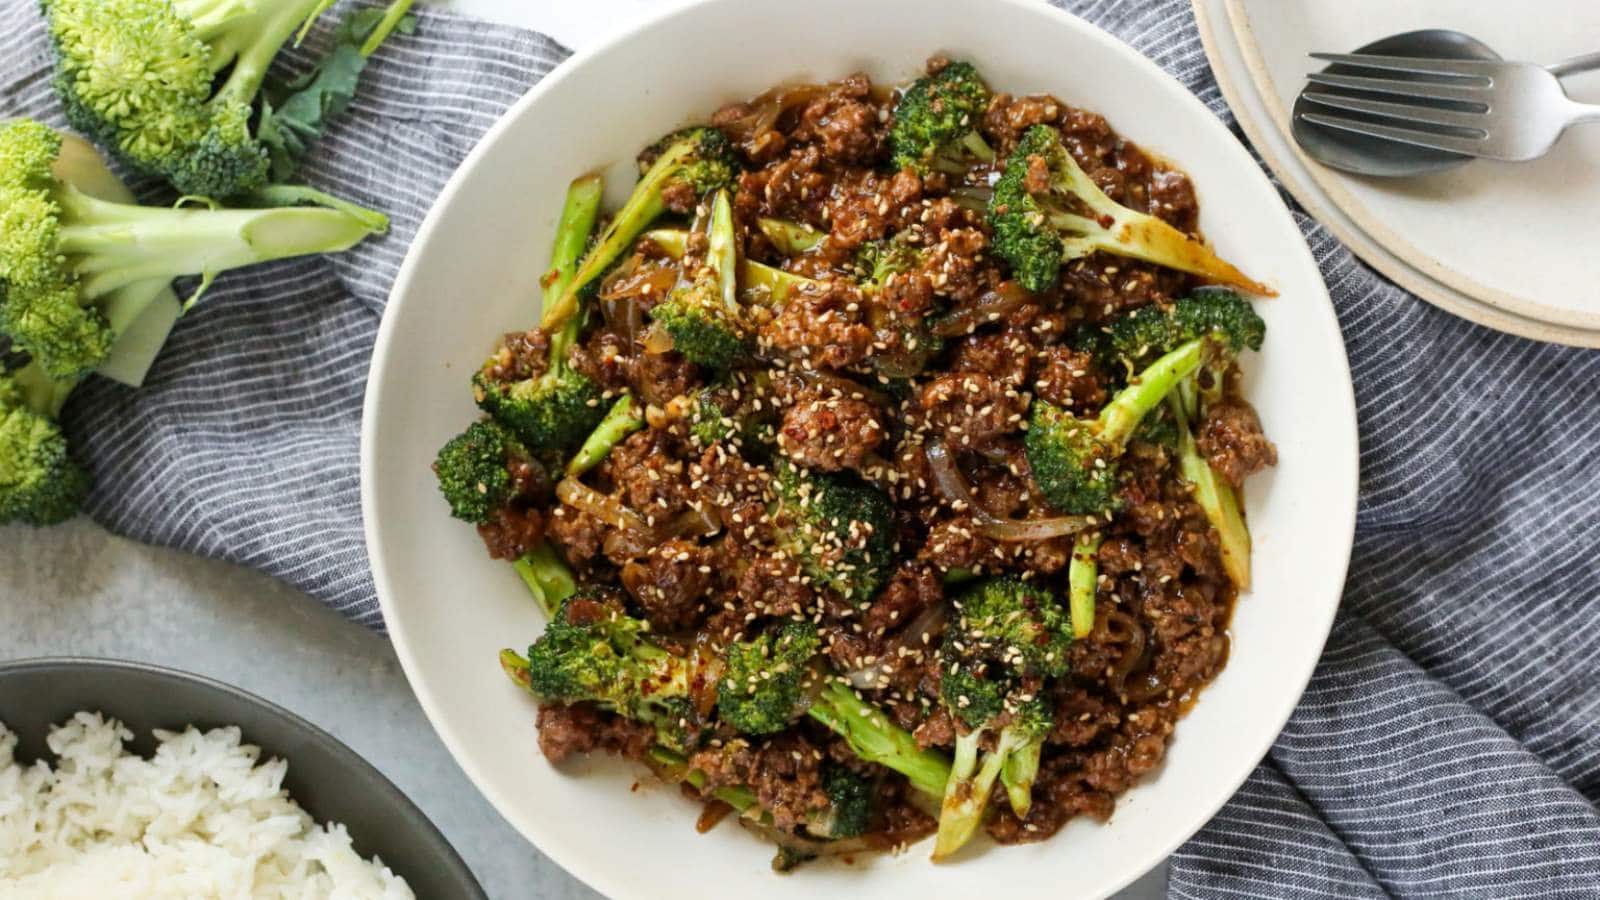 Easy Ground Beef and Broccoli Stir Fry recipe by Street Smart Nutrition. 